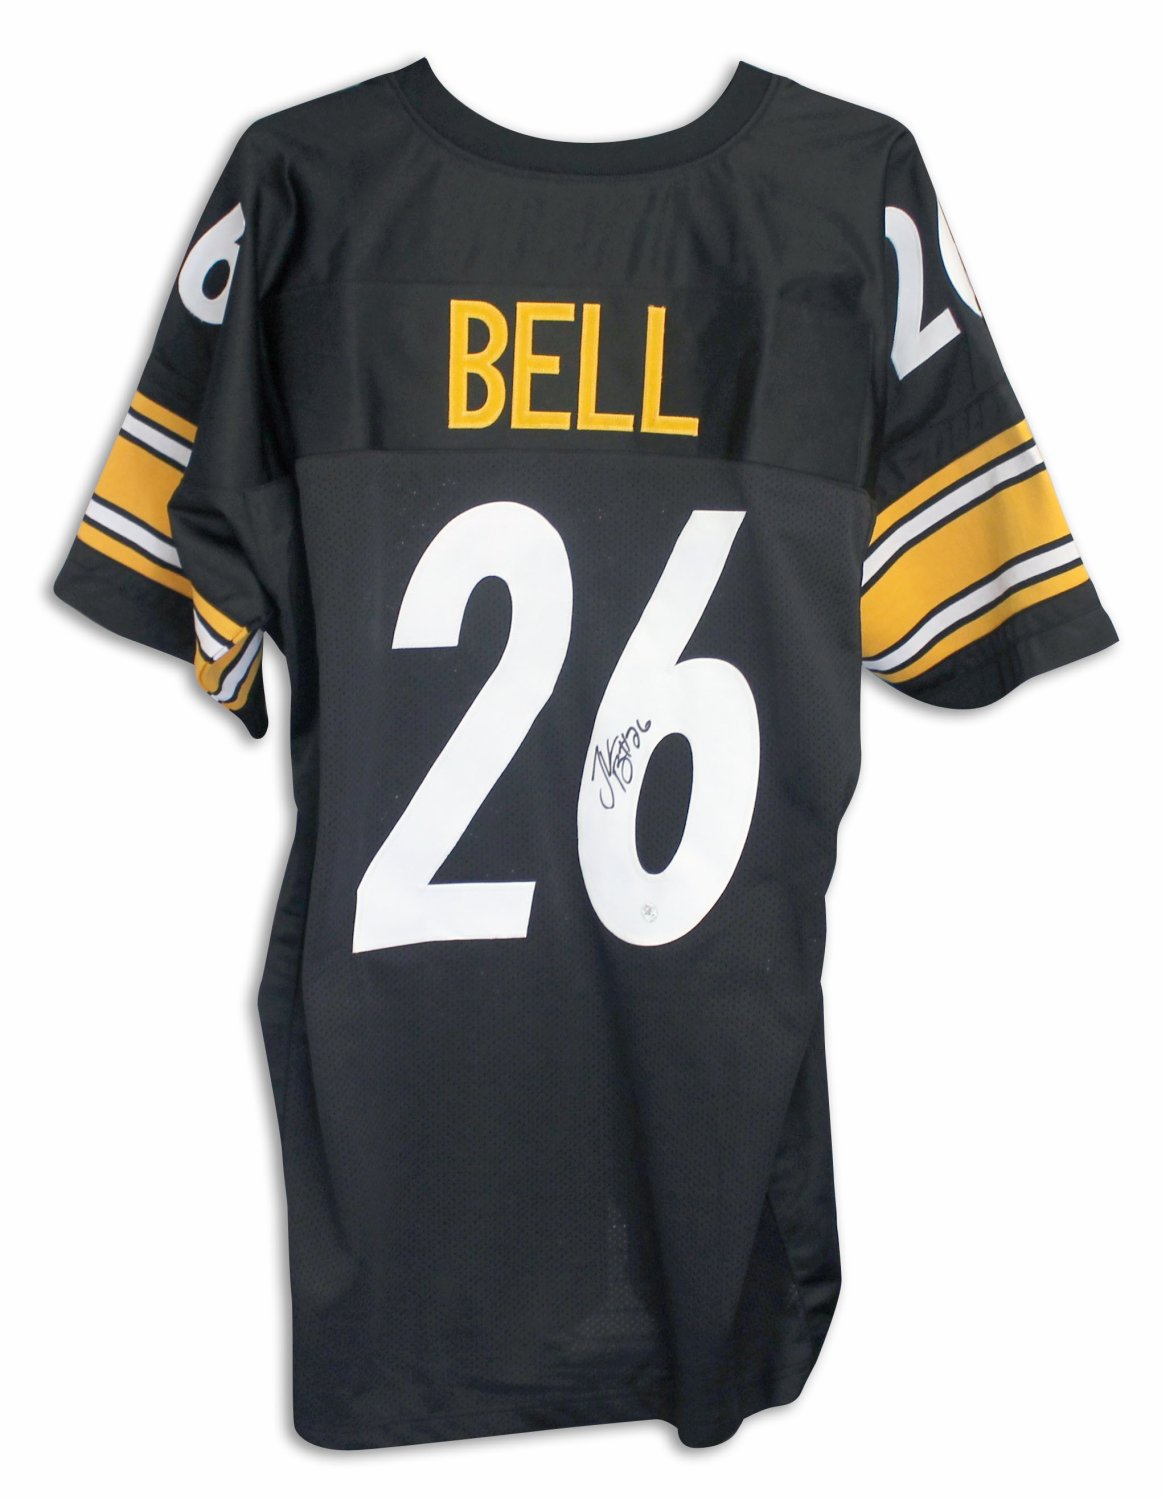 Le'Veon Bell Pittsburgh Steelers Autographed Signed Black Jersey